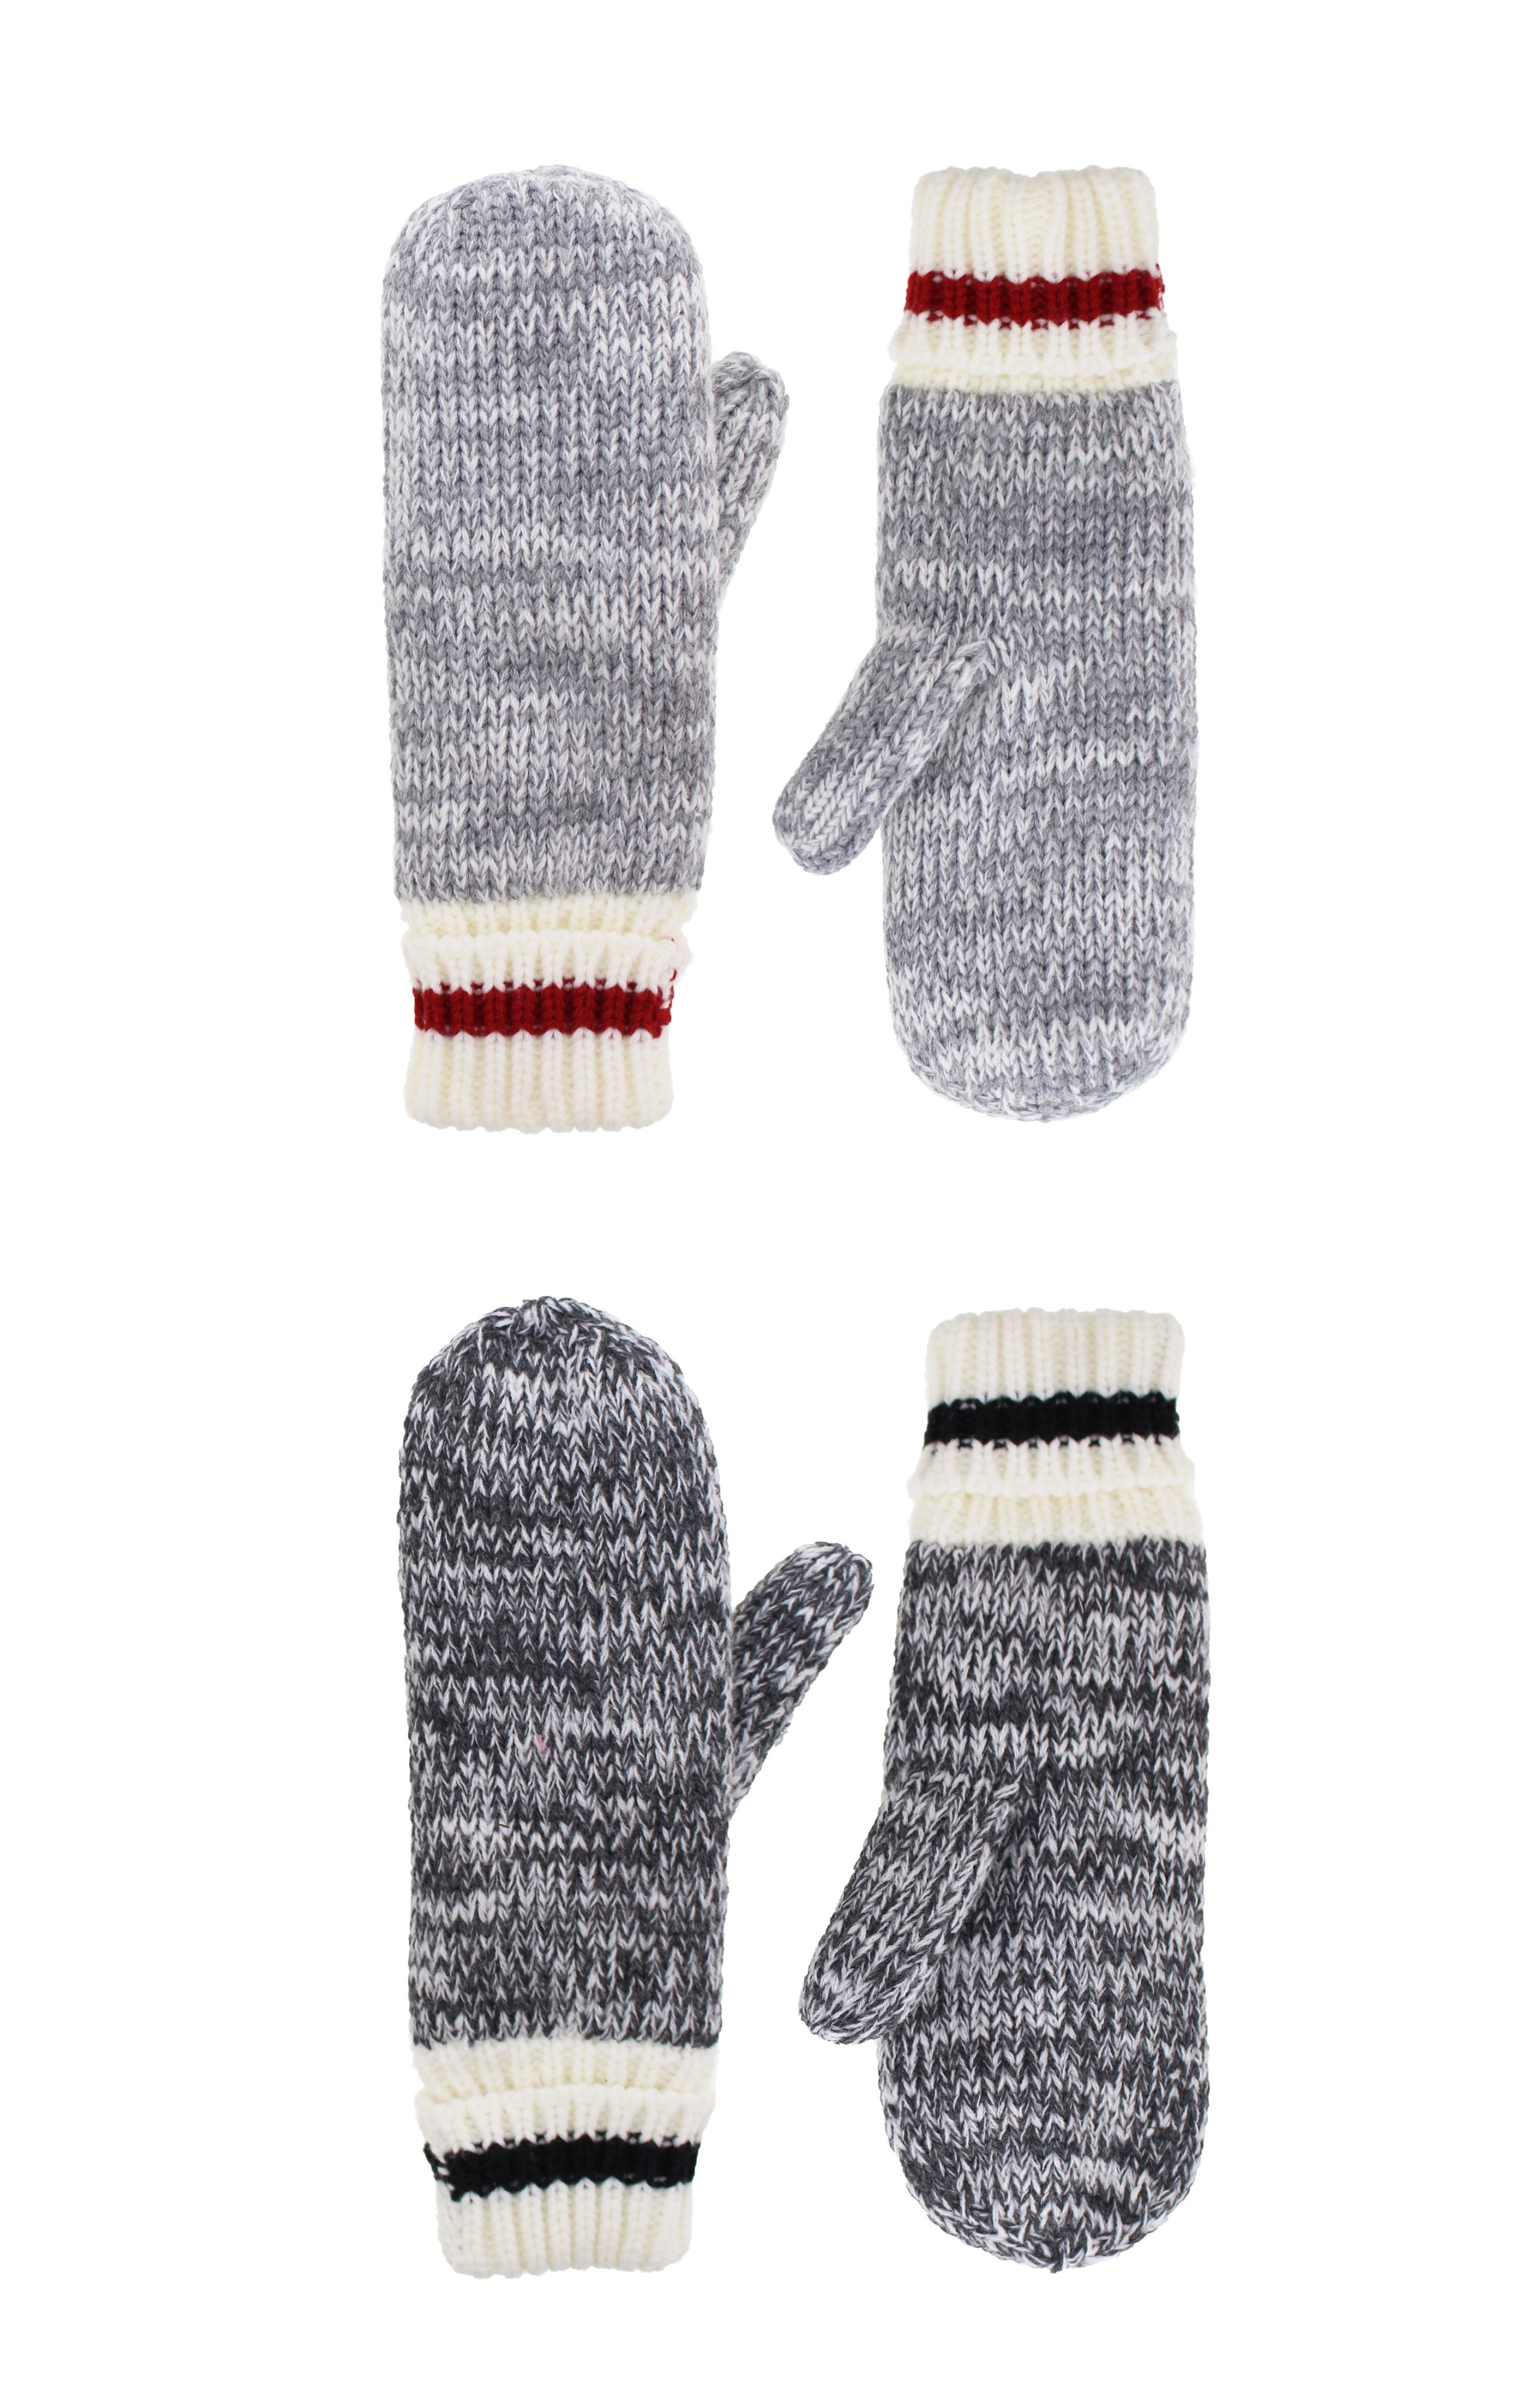 Great Northern Women's Mitts - Black/Grey